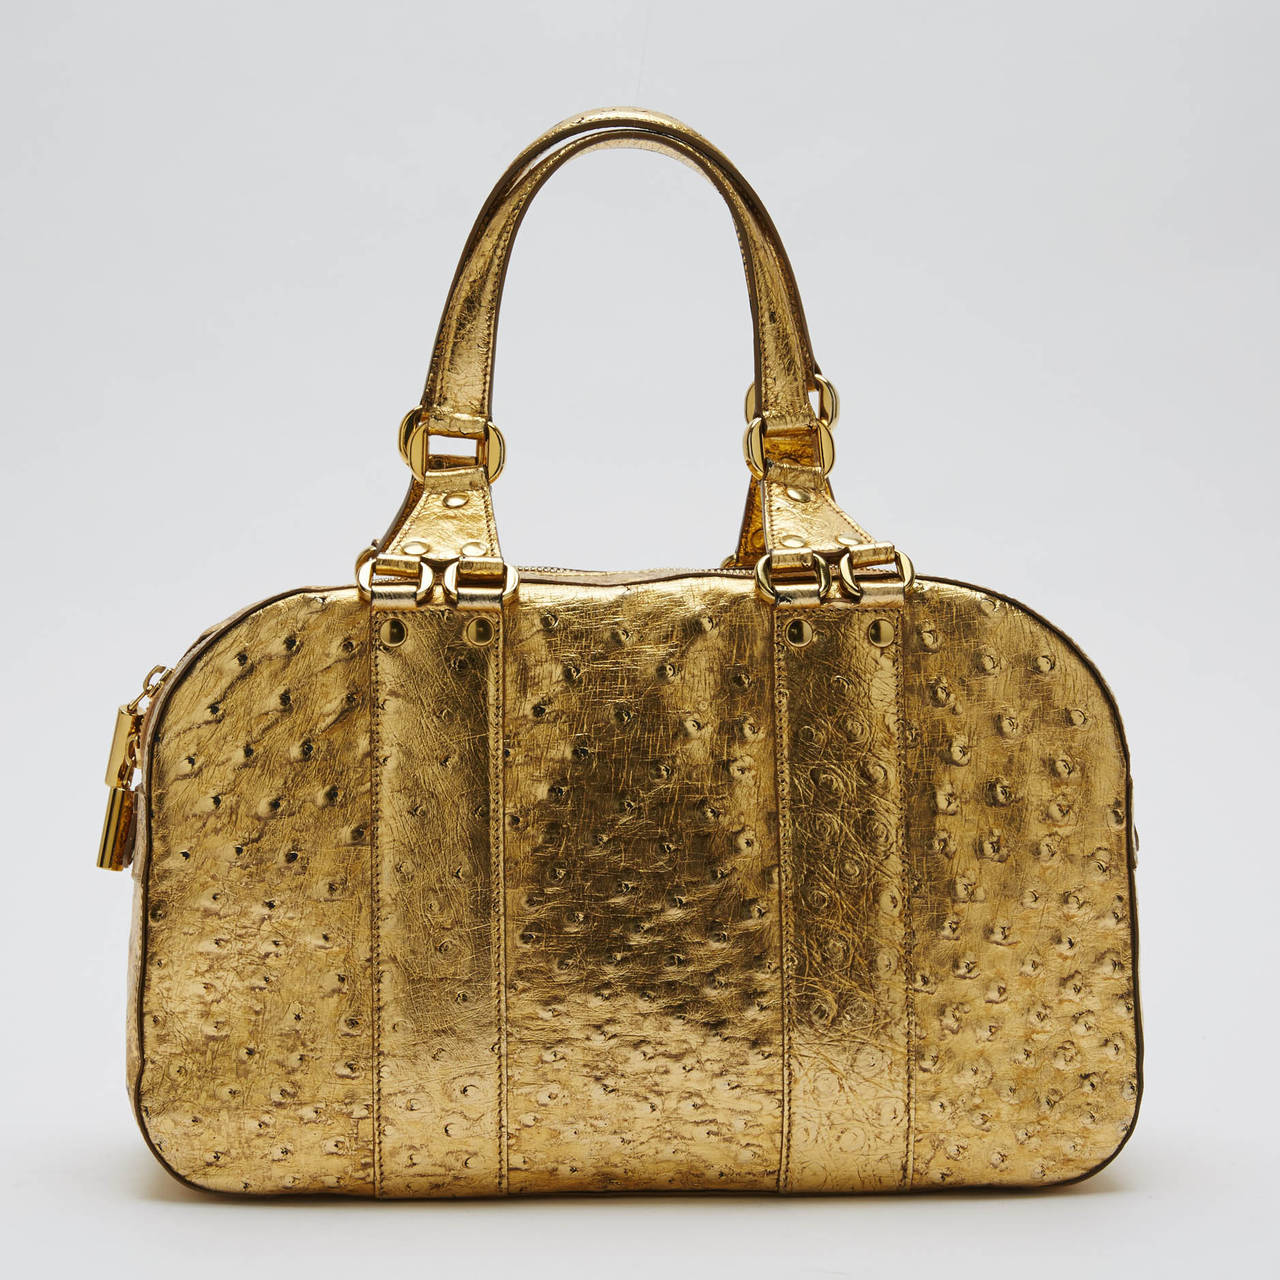 This beautiful, authentic gold ostrich duffle with gold hardware and suede lining is a very convenient handbag to buy as an everyday bag. This Donna Karan Duffle Ostrich Small offers plenty of space and it is easy to carry. **Note: These are